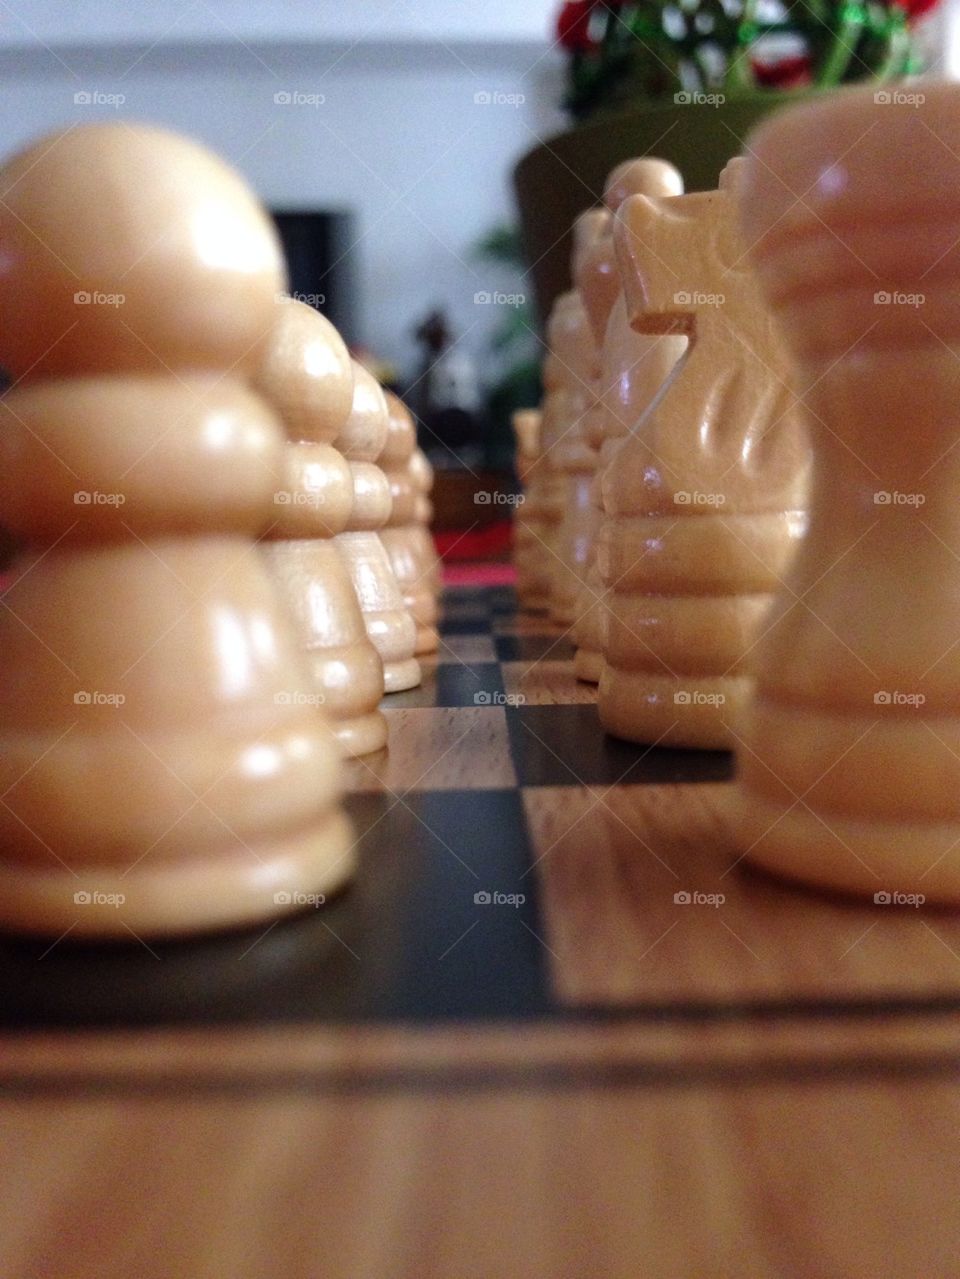 A game of chess